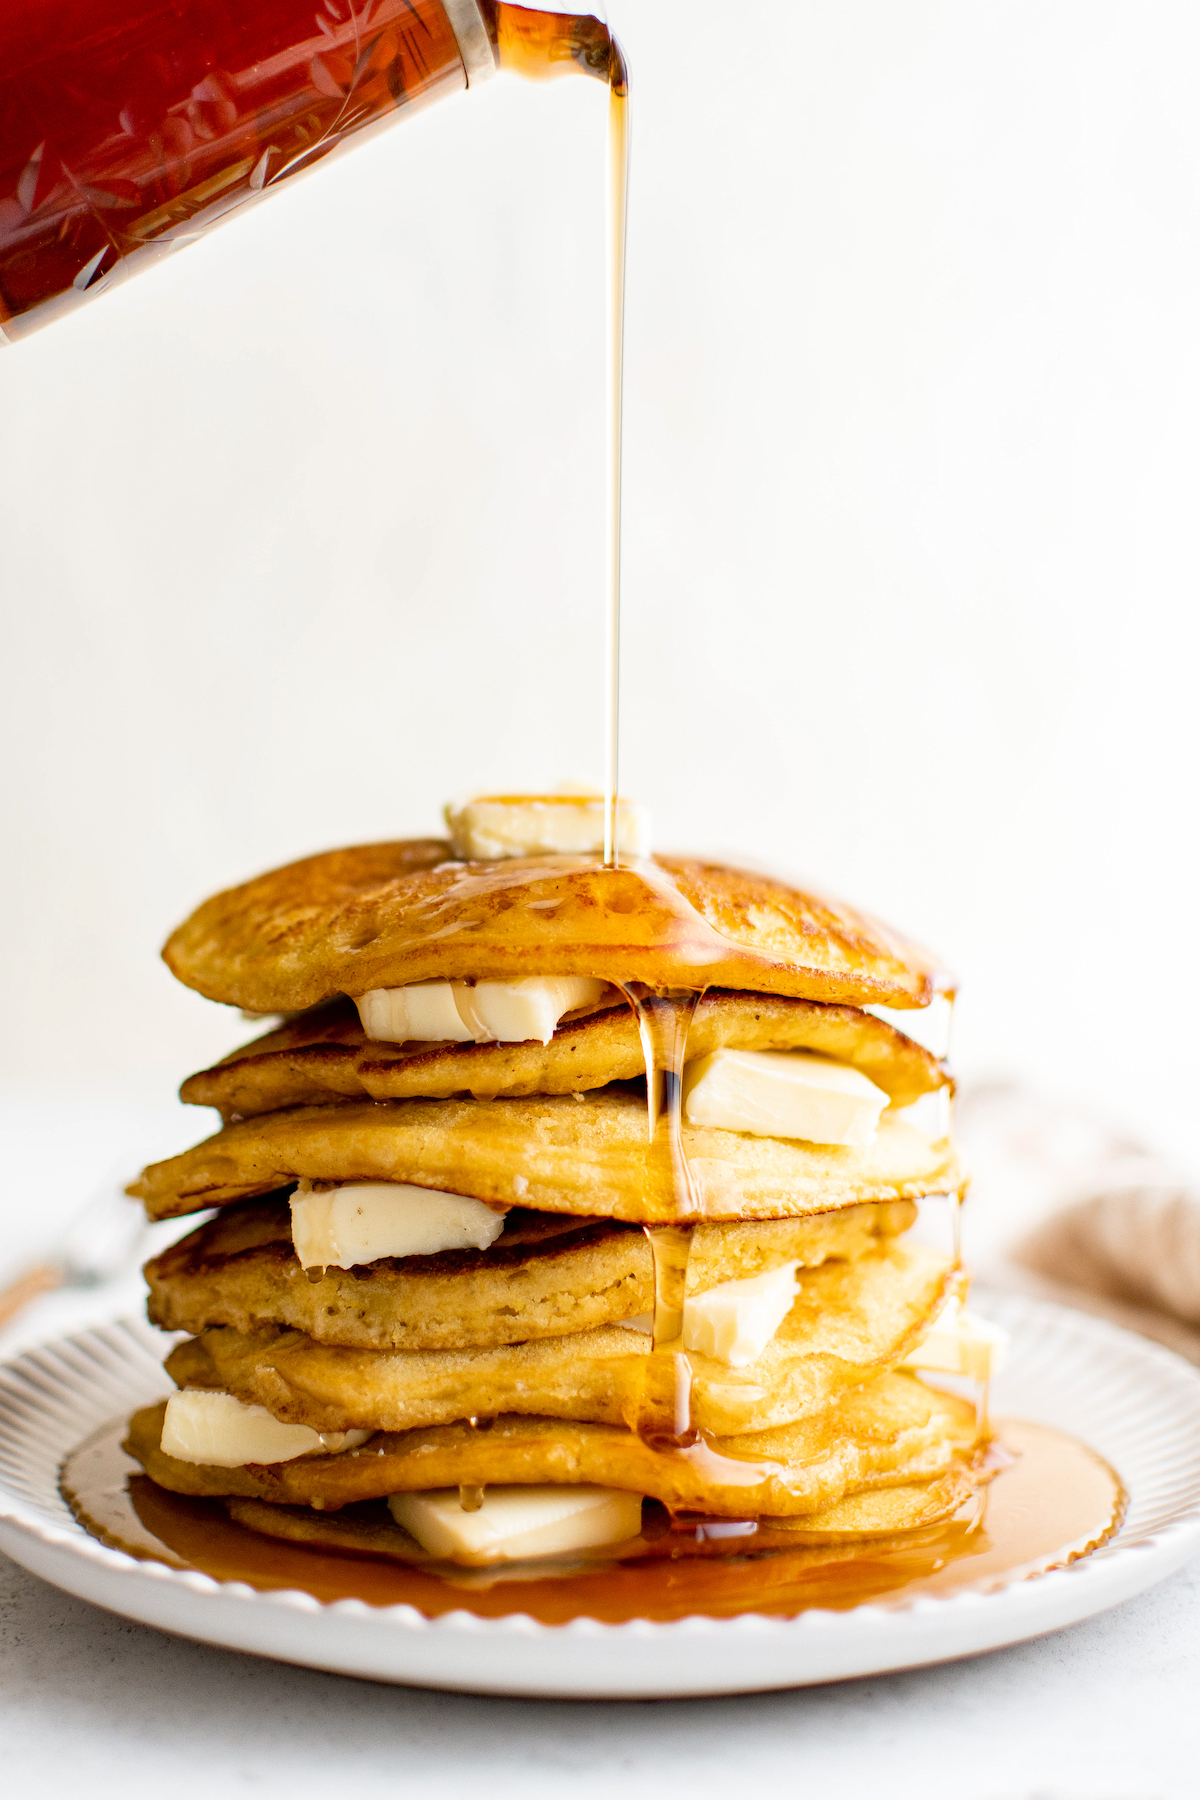 Pouring syrup over a stack of johnny cakes with pats of butter in between.